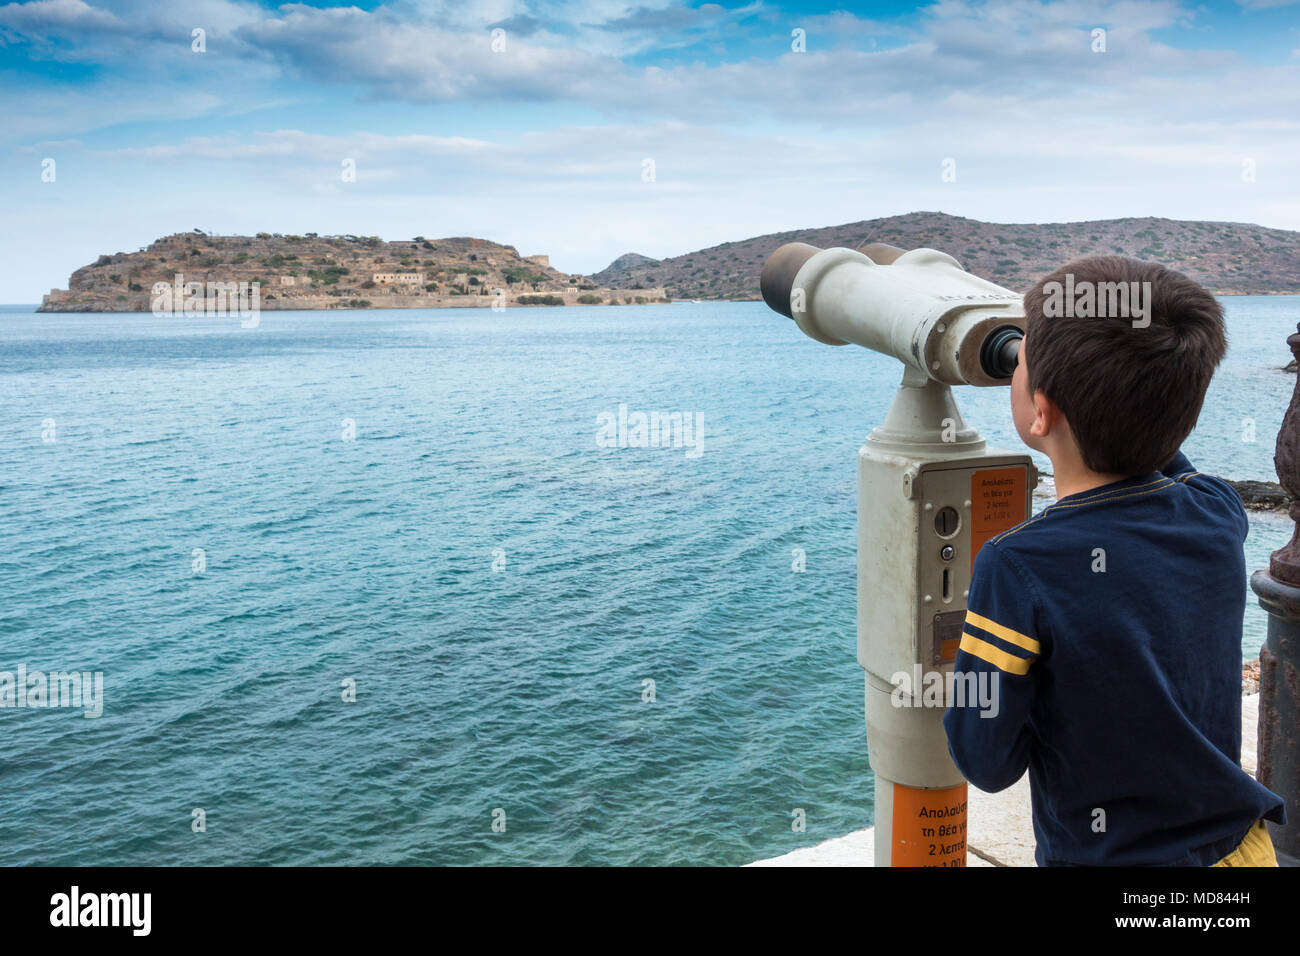 Boy admiring scenic view of sea and mountain through coin operated binoculars Stock Photo